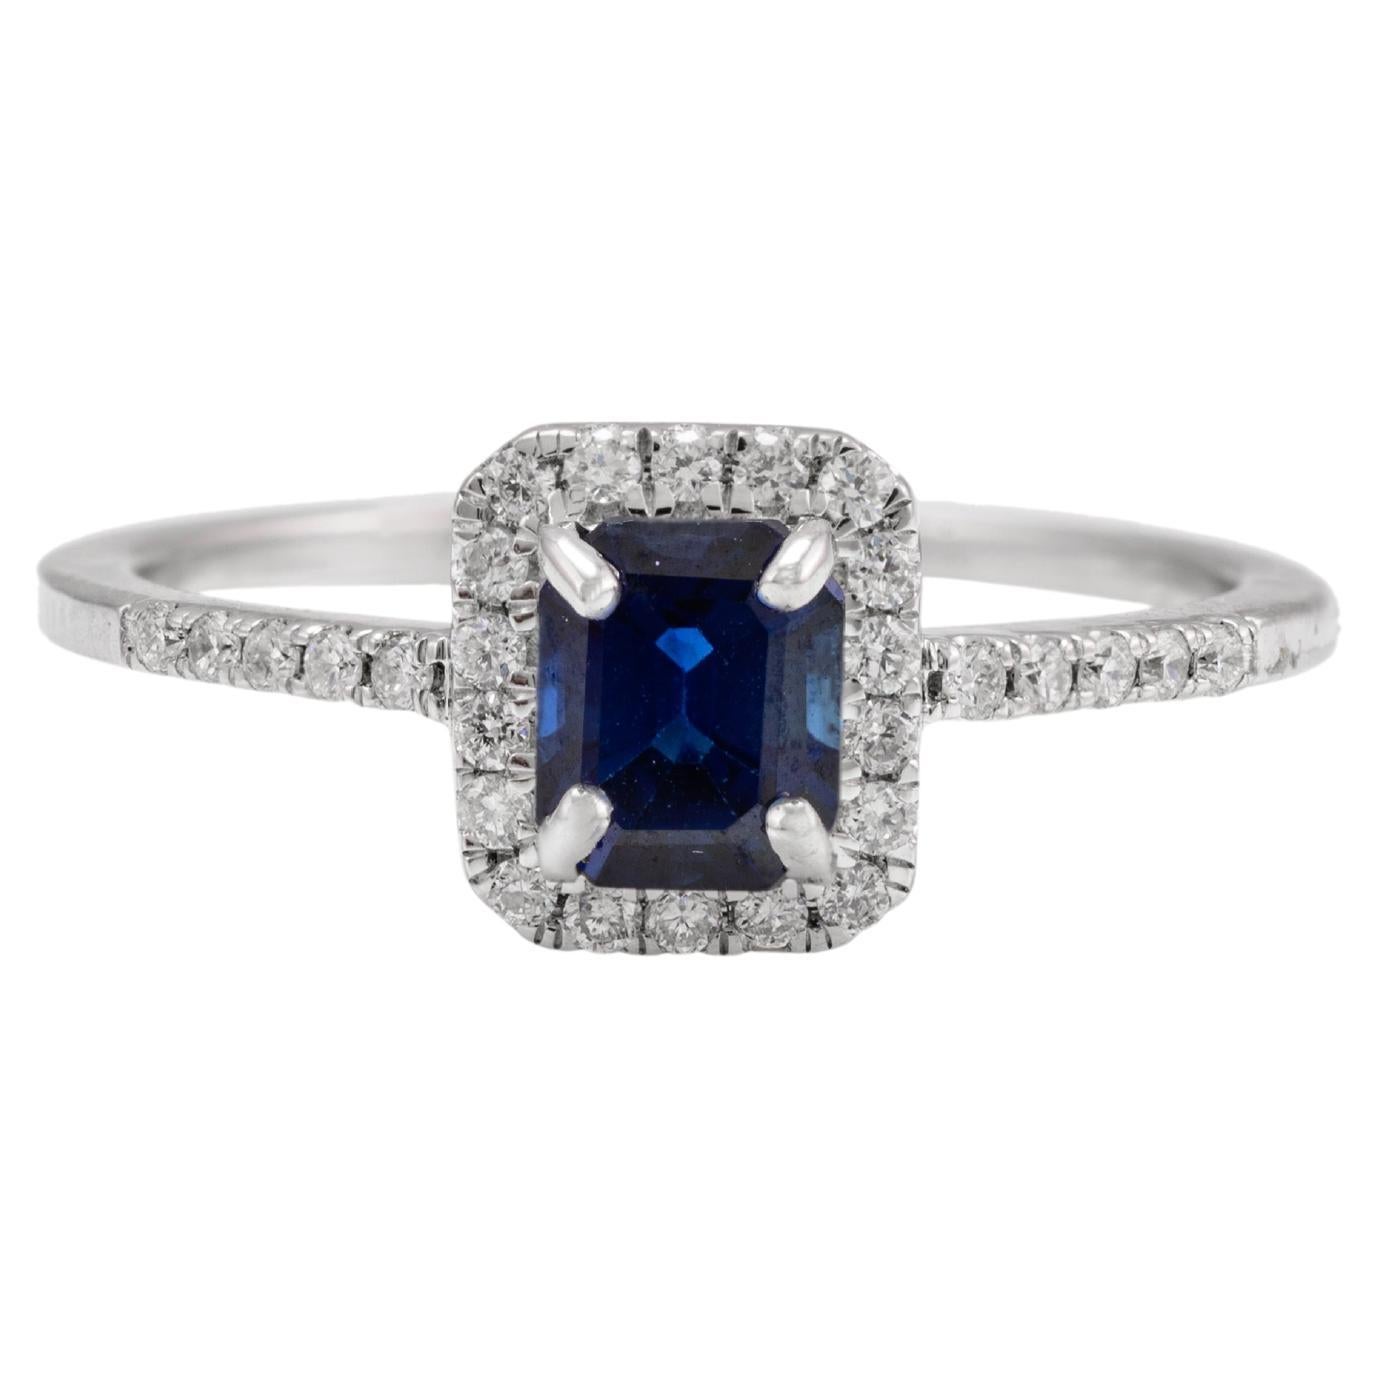 18k Solid White Gold Octagon Blue Sapphire and Diamond Halo Engagement Ring